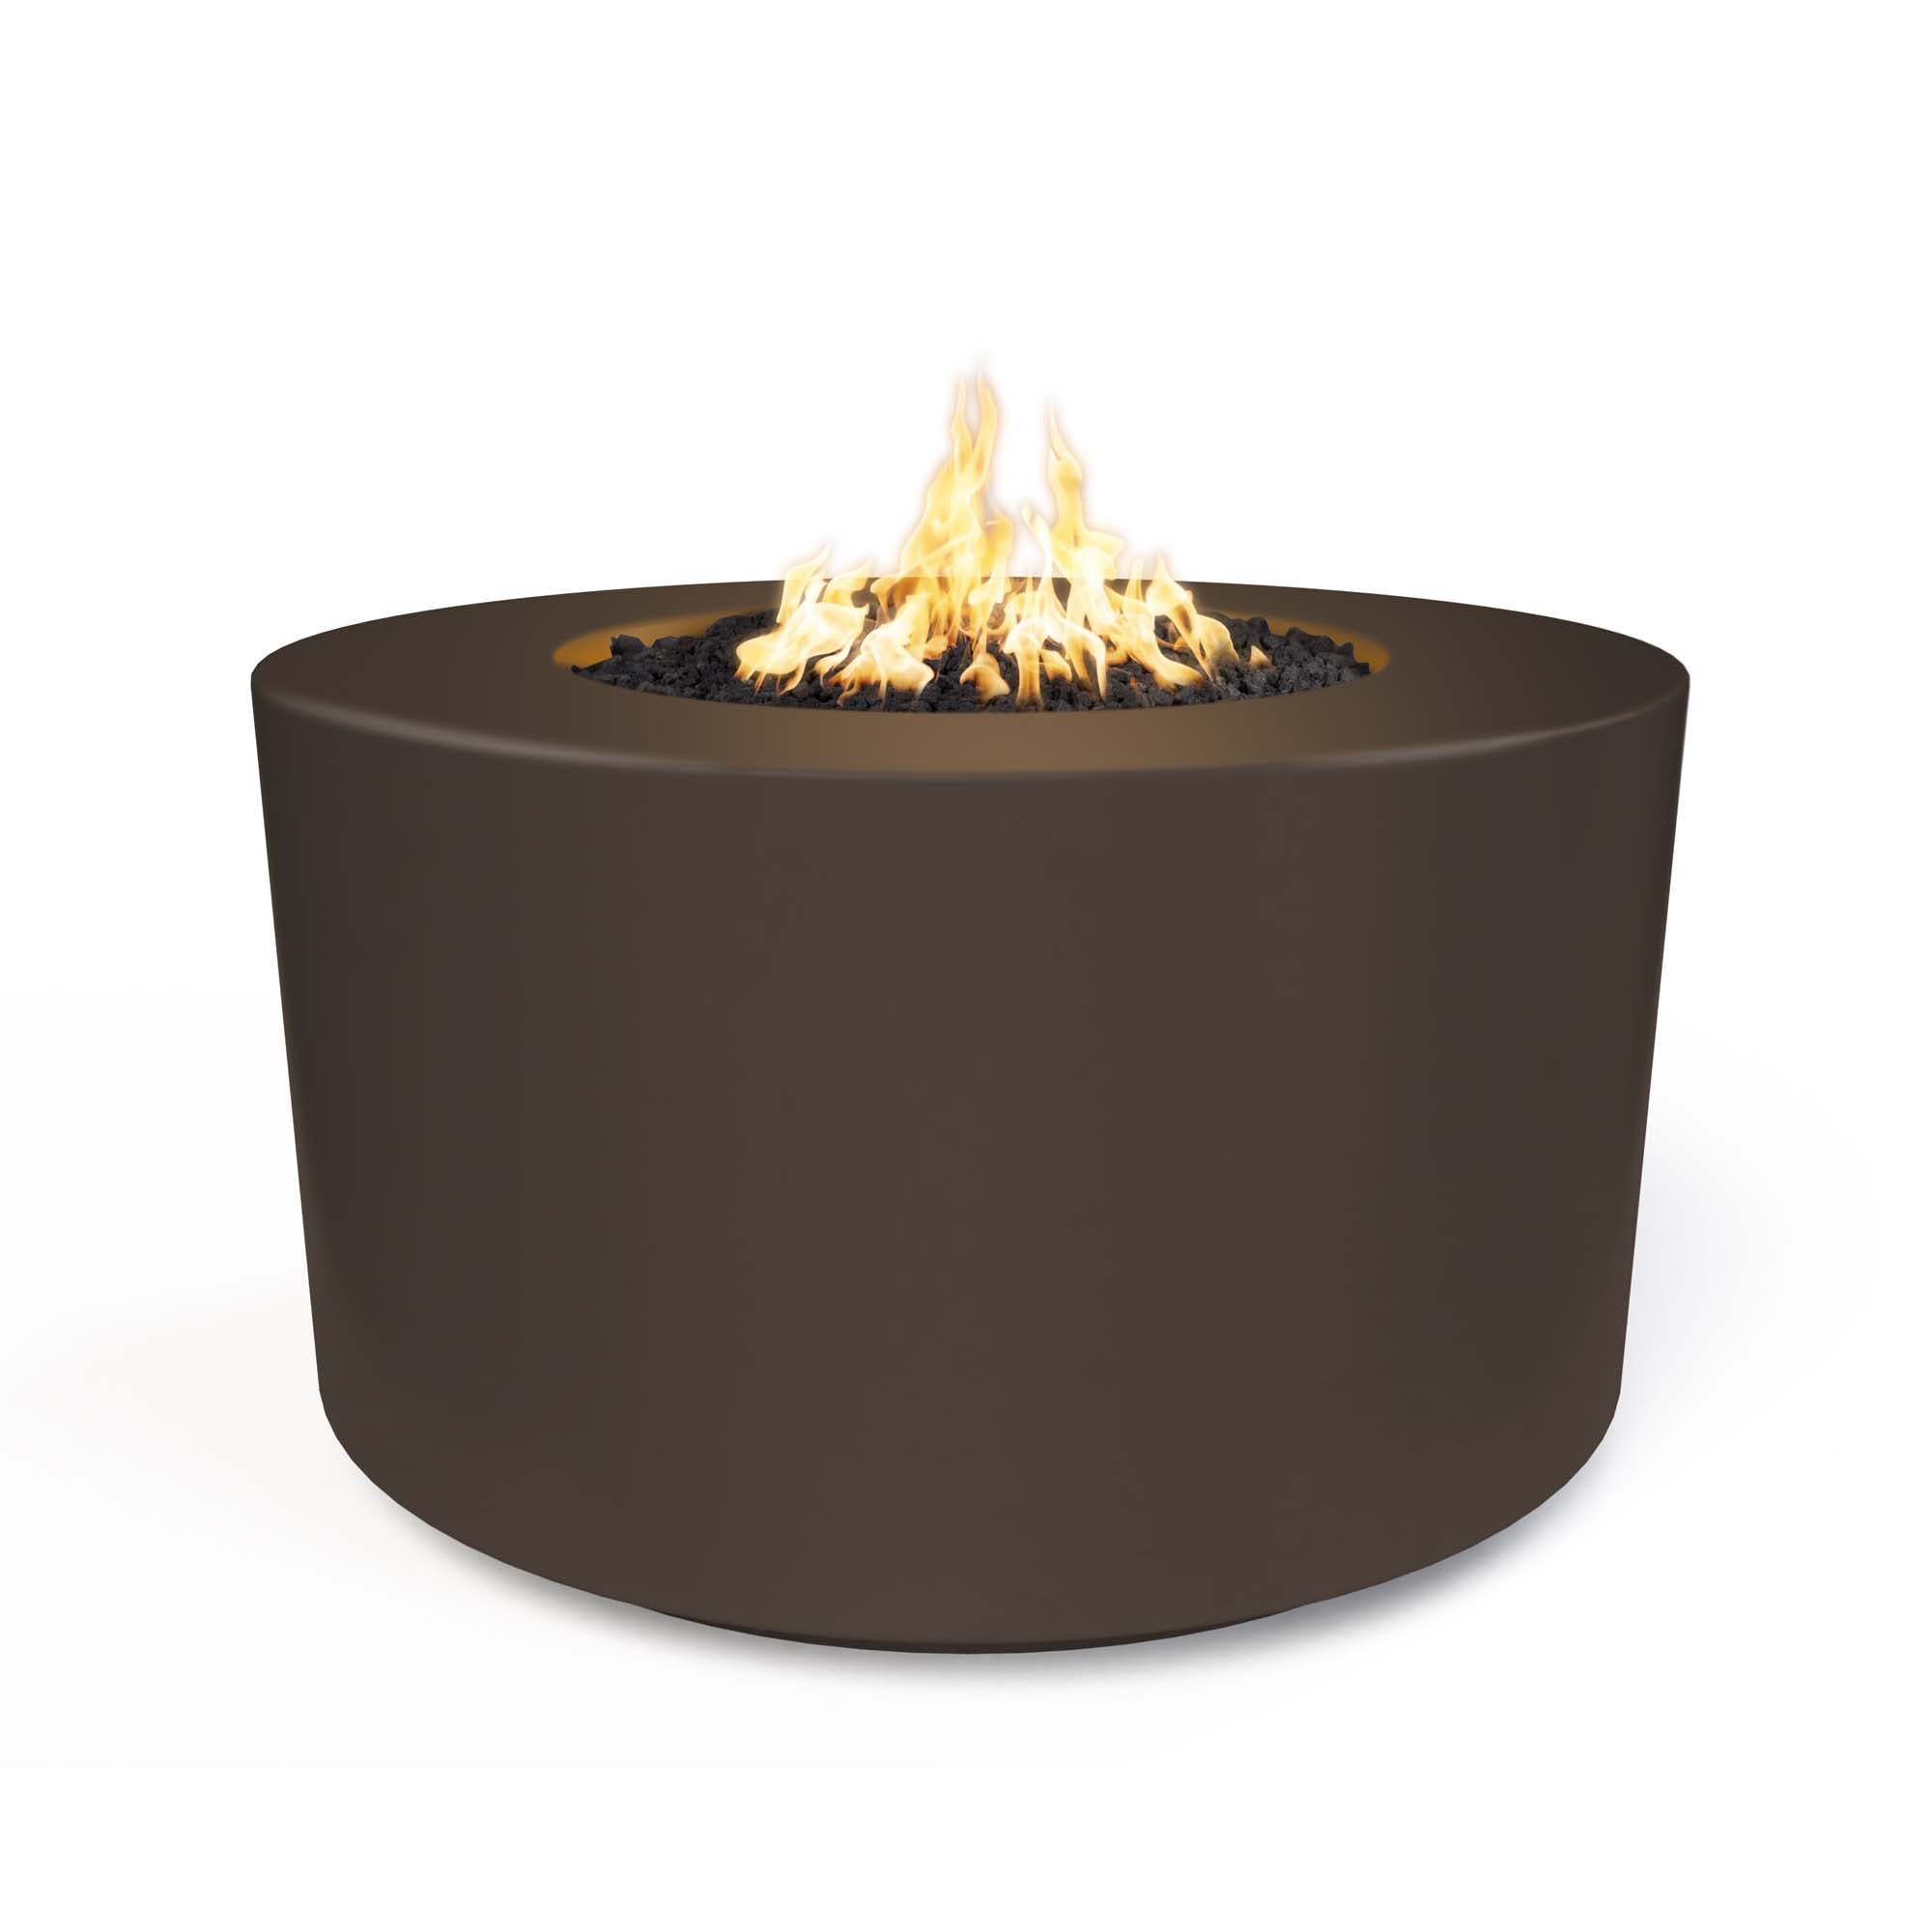 42" Florence Fire Table - 24" Tall - Chocolate